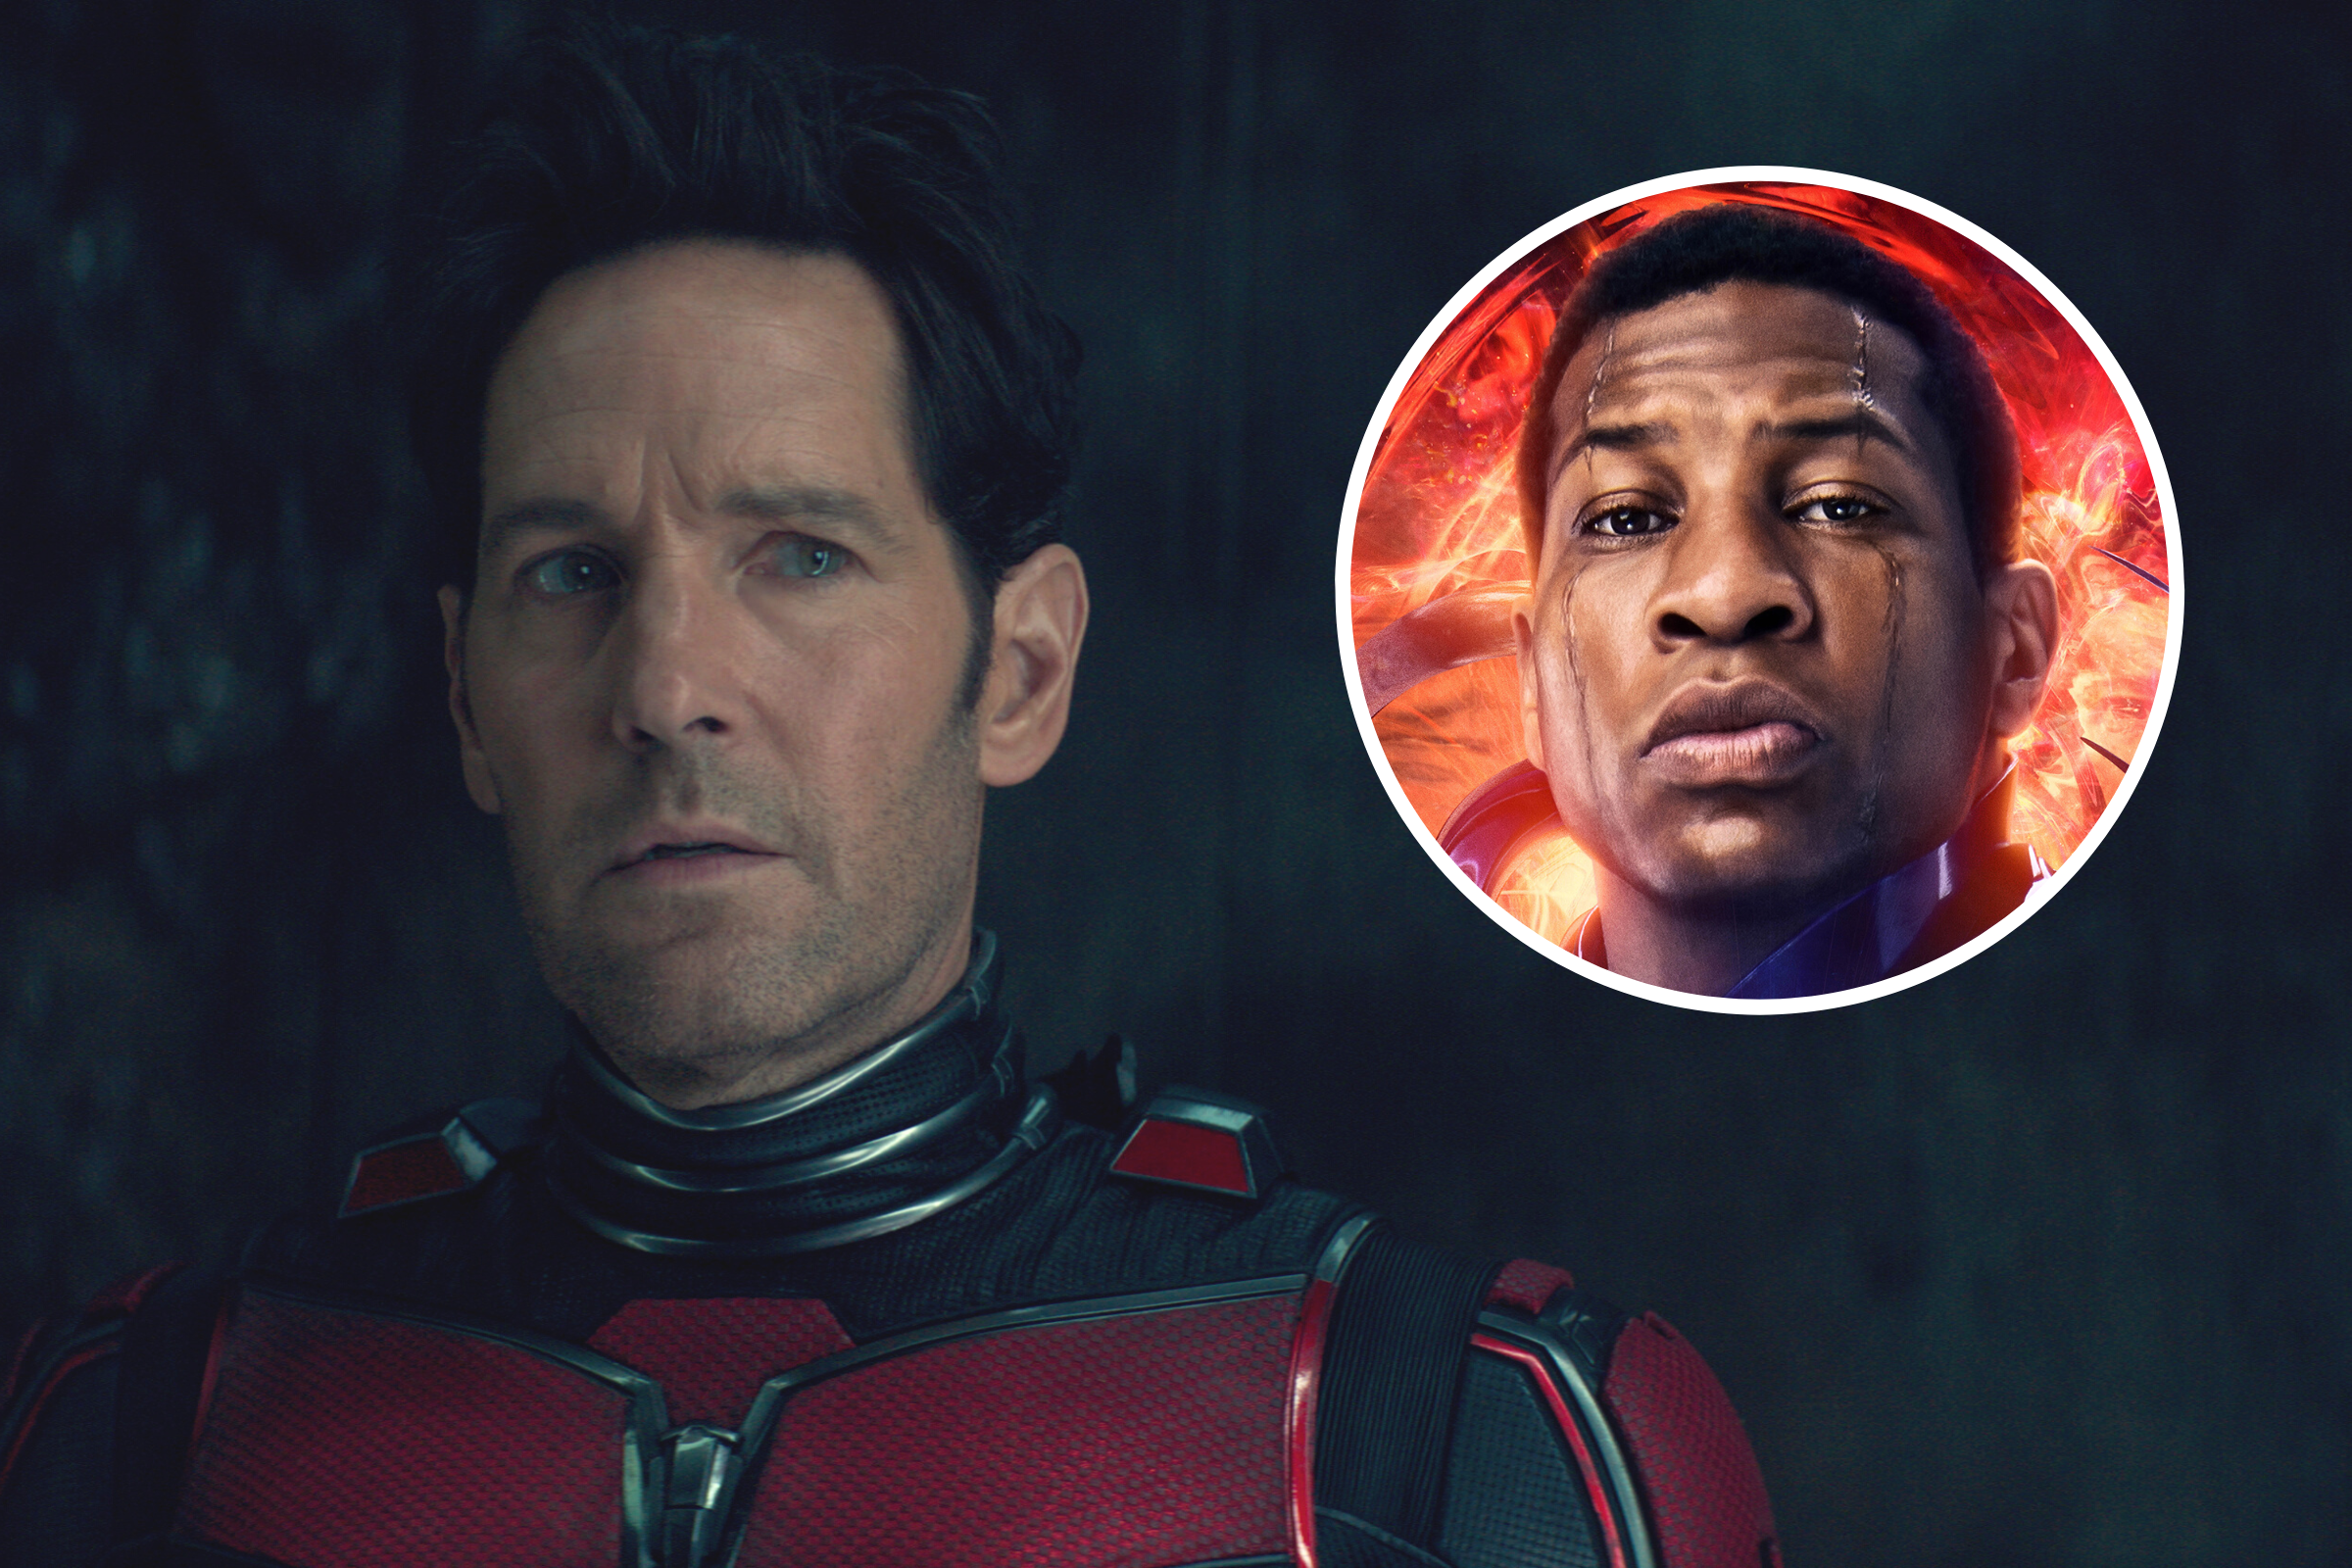 Everything You Need to Know About Those Ant-Man End of Credits